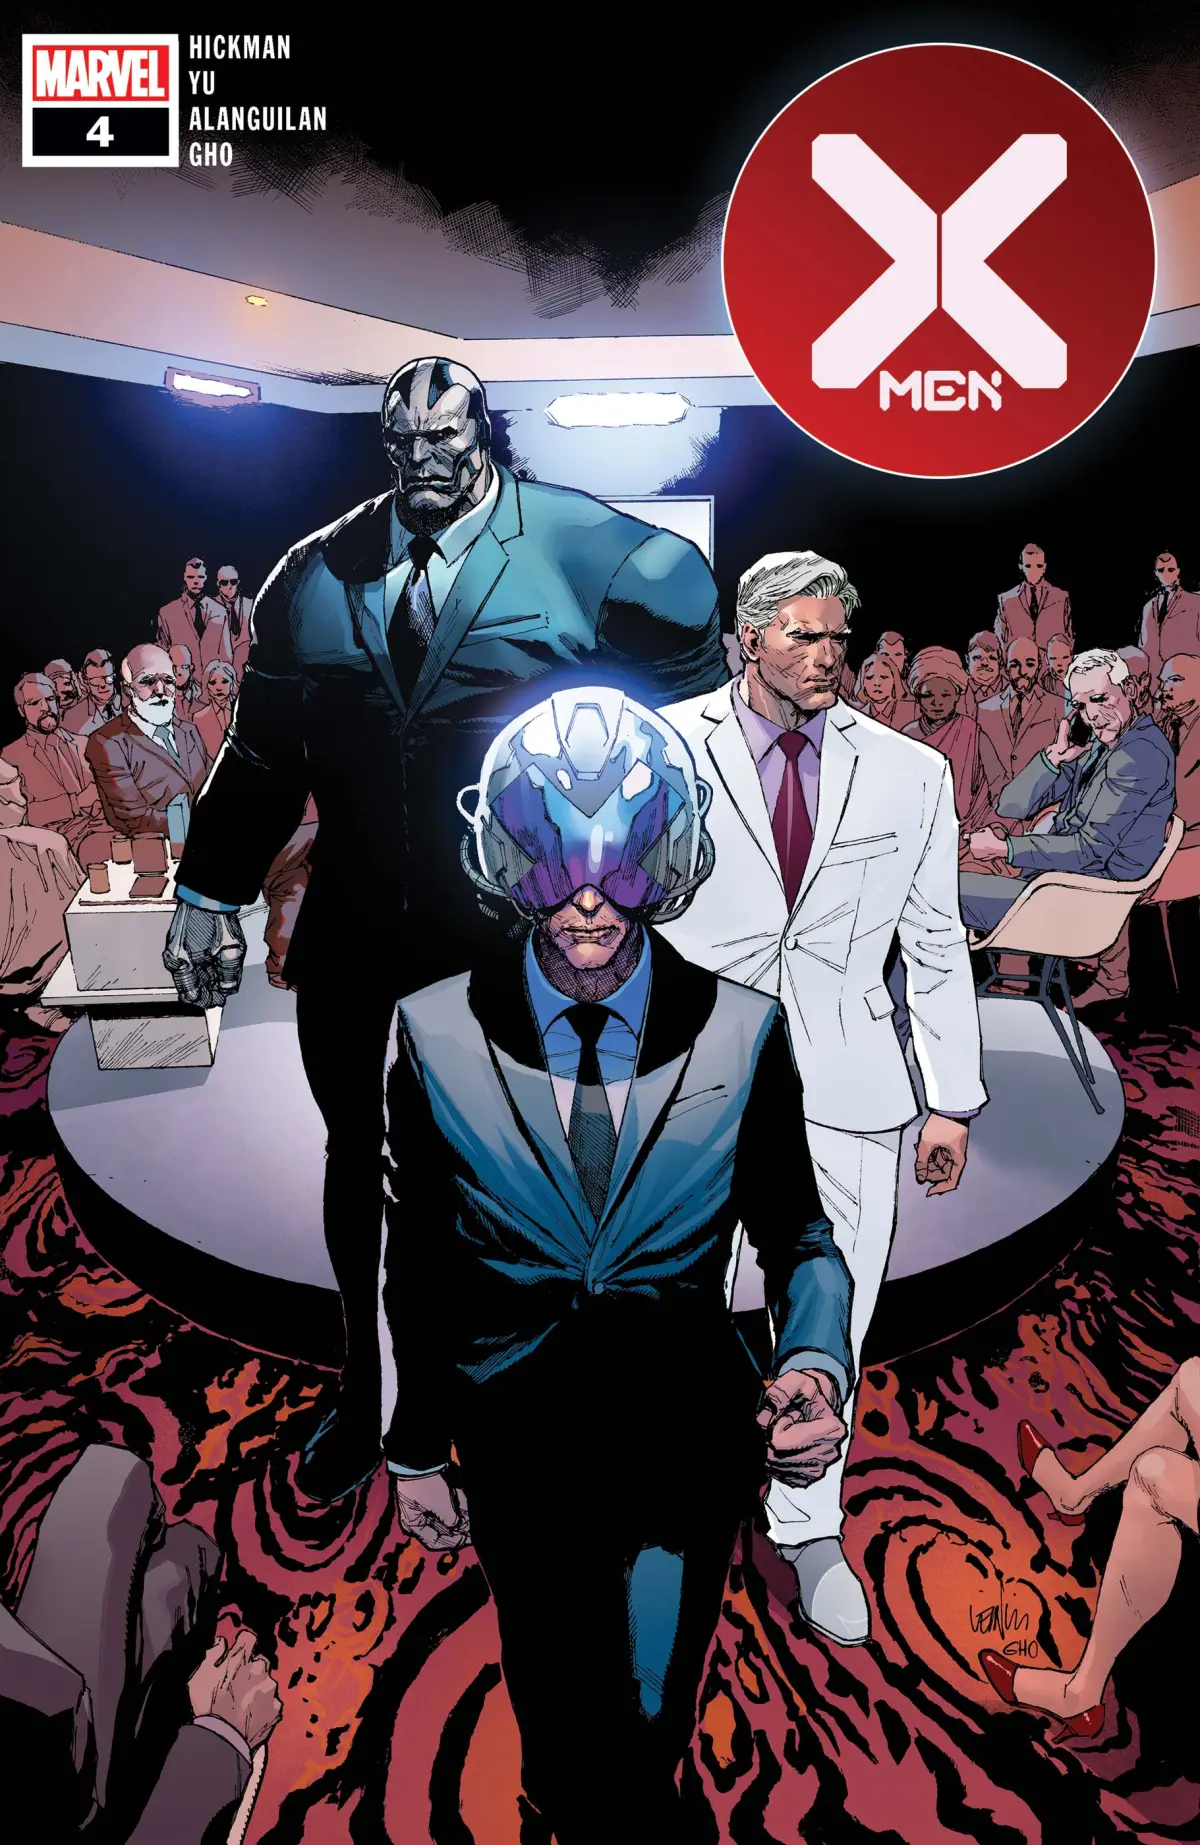 Cover for X-Men #4 by Jonathan Hickman